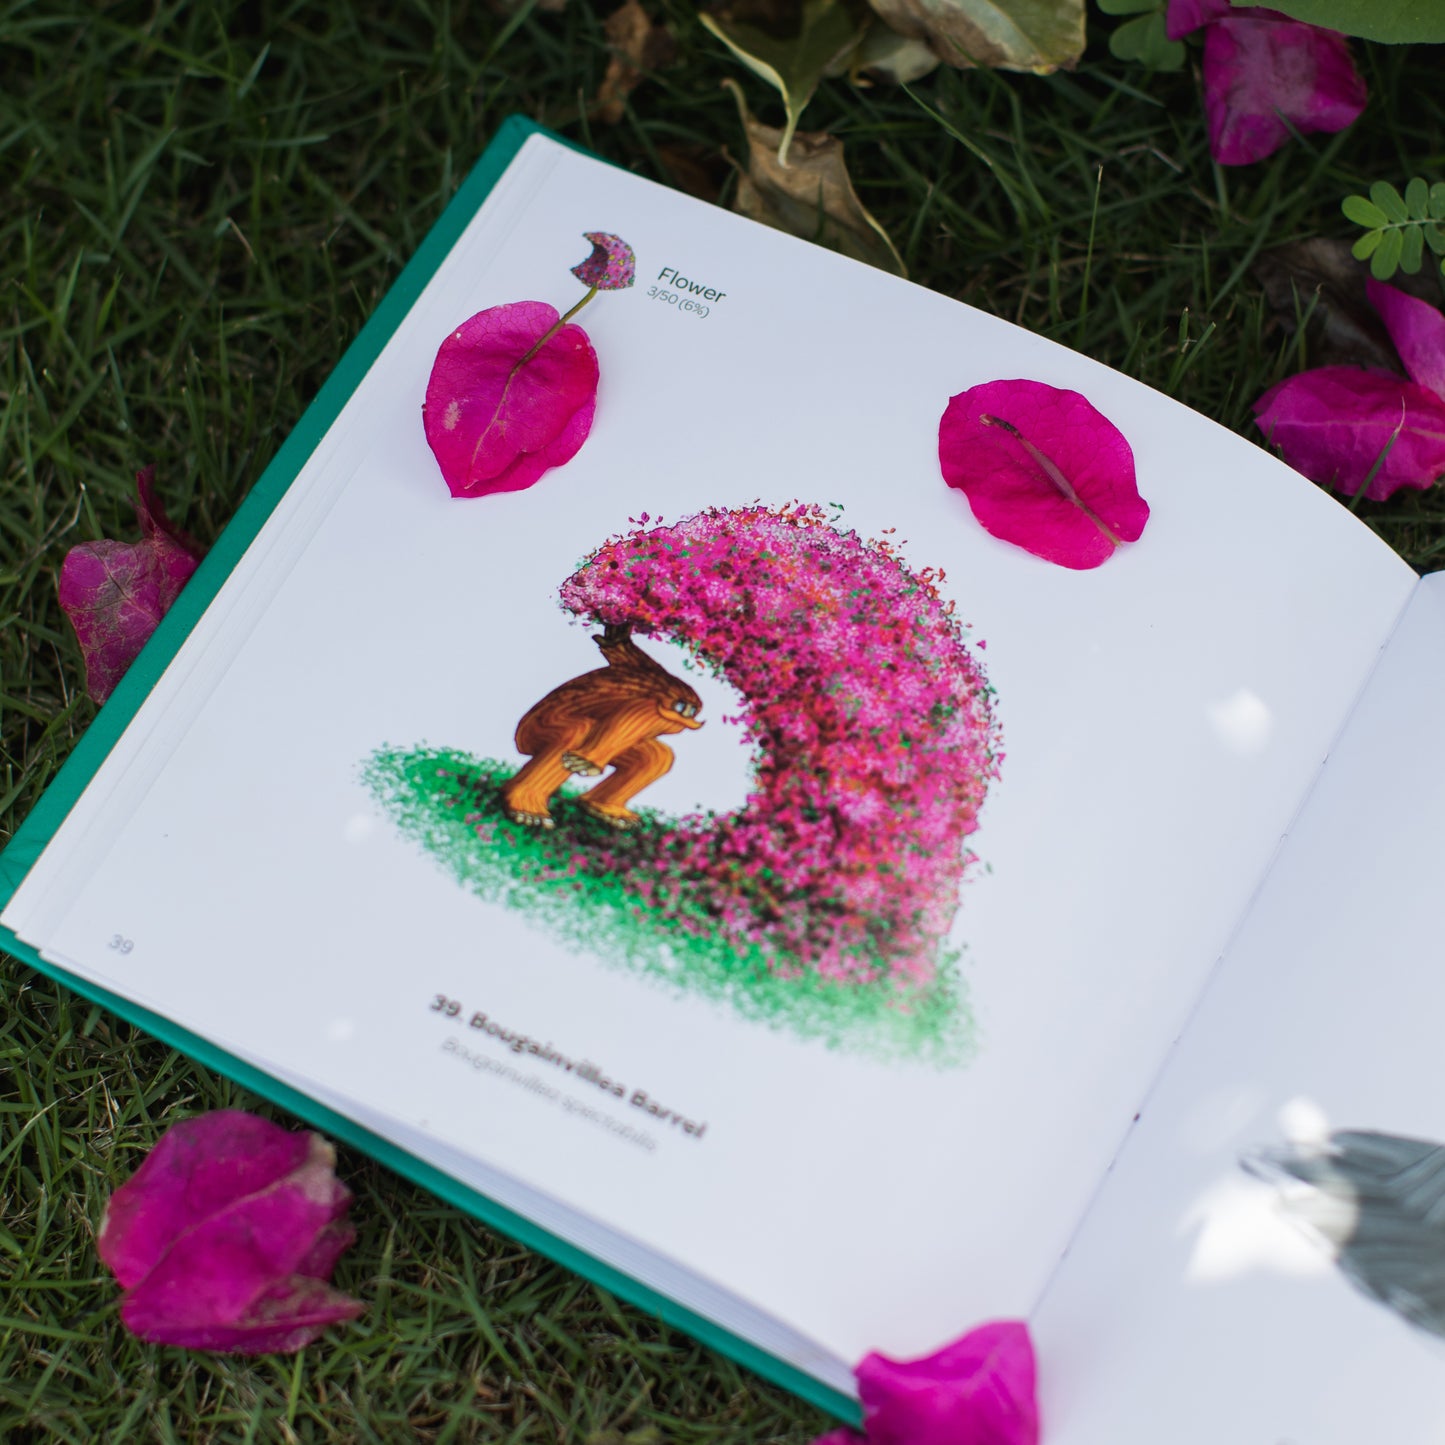 An open hardcover book lies on grass, surrounded by pink flower petals, displaying a vibrant illustration of an orange sasquatch under a birght pink bougainvillea bush adorned with flowers on one page.